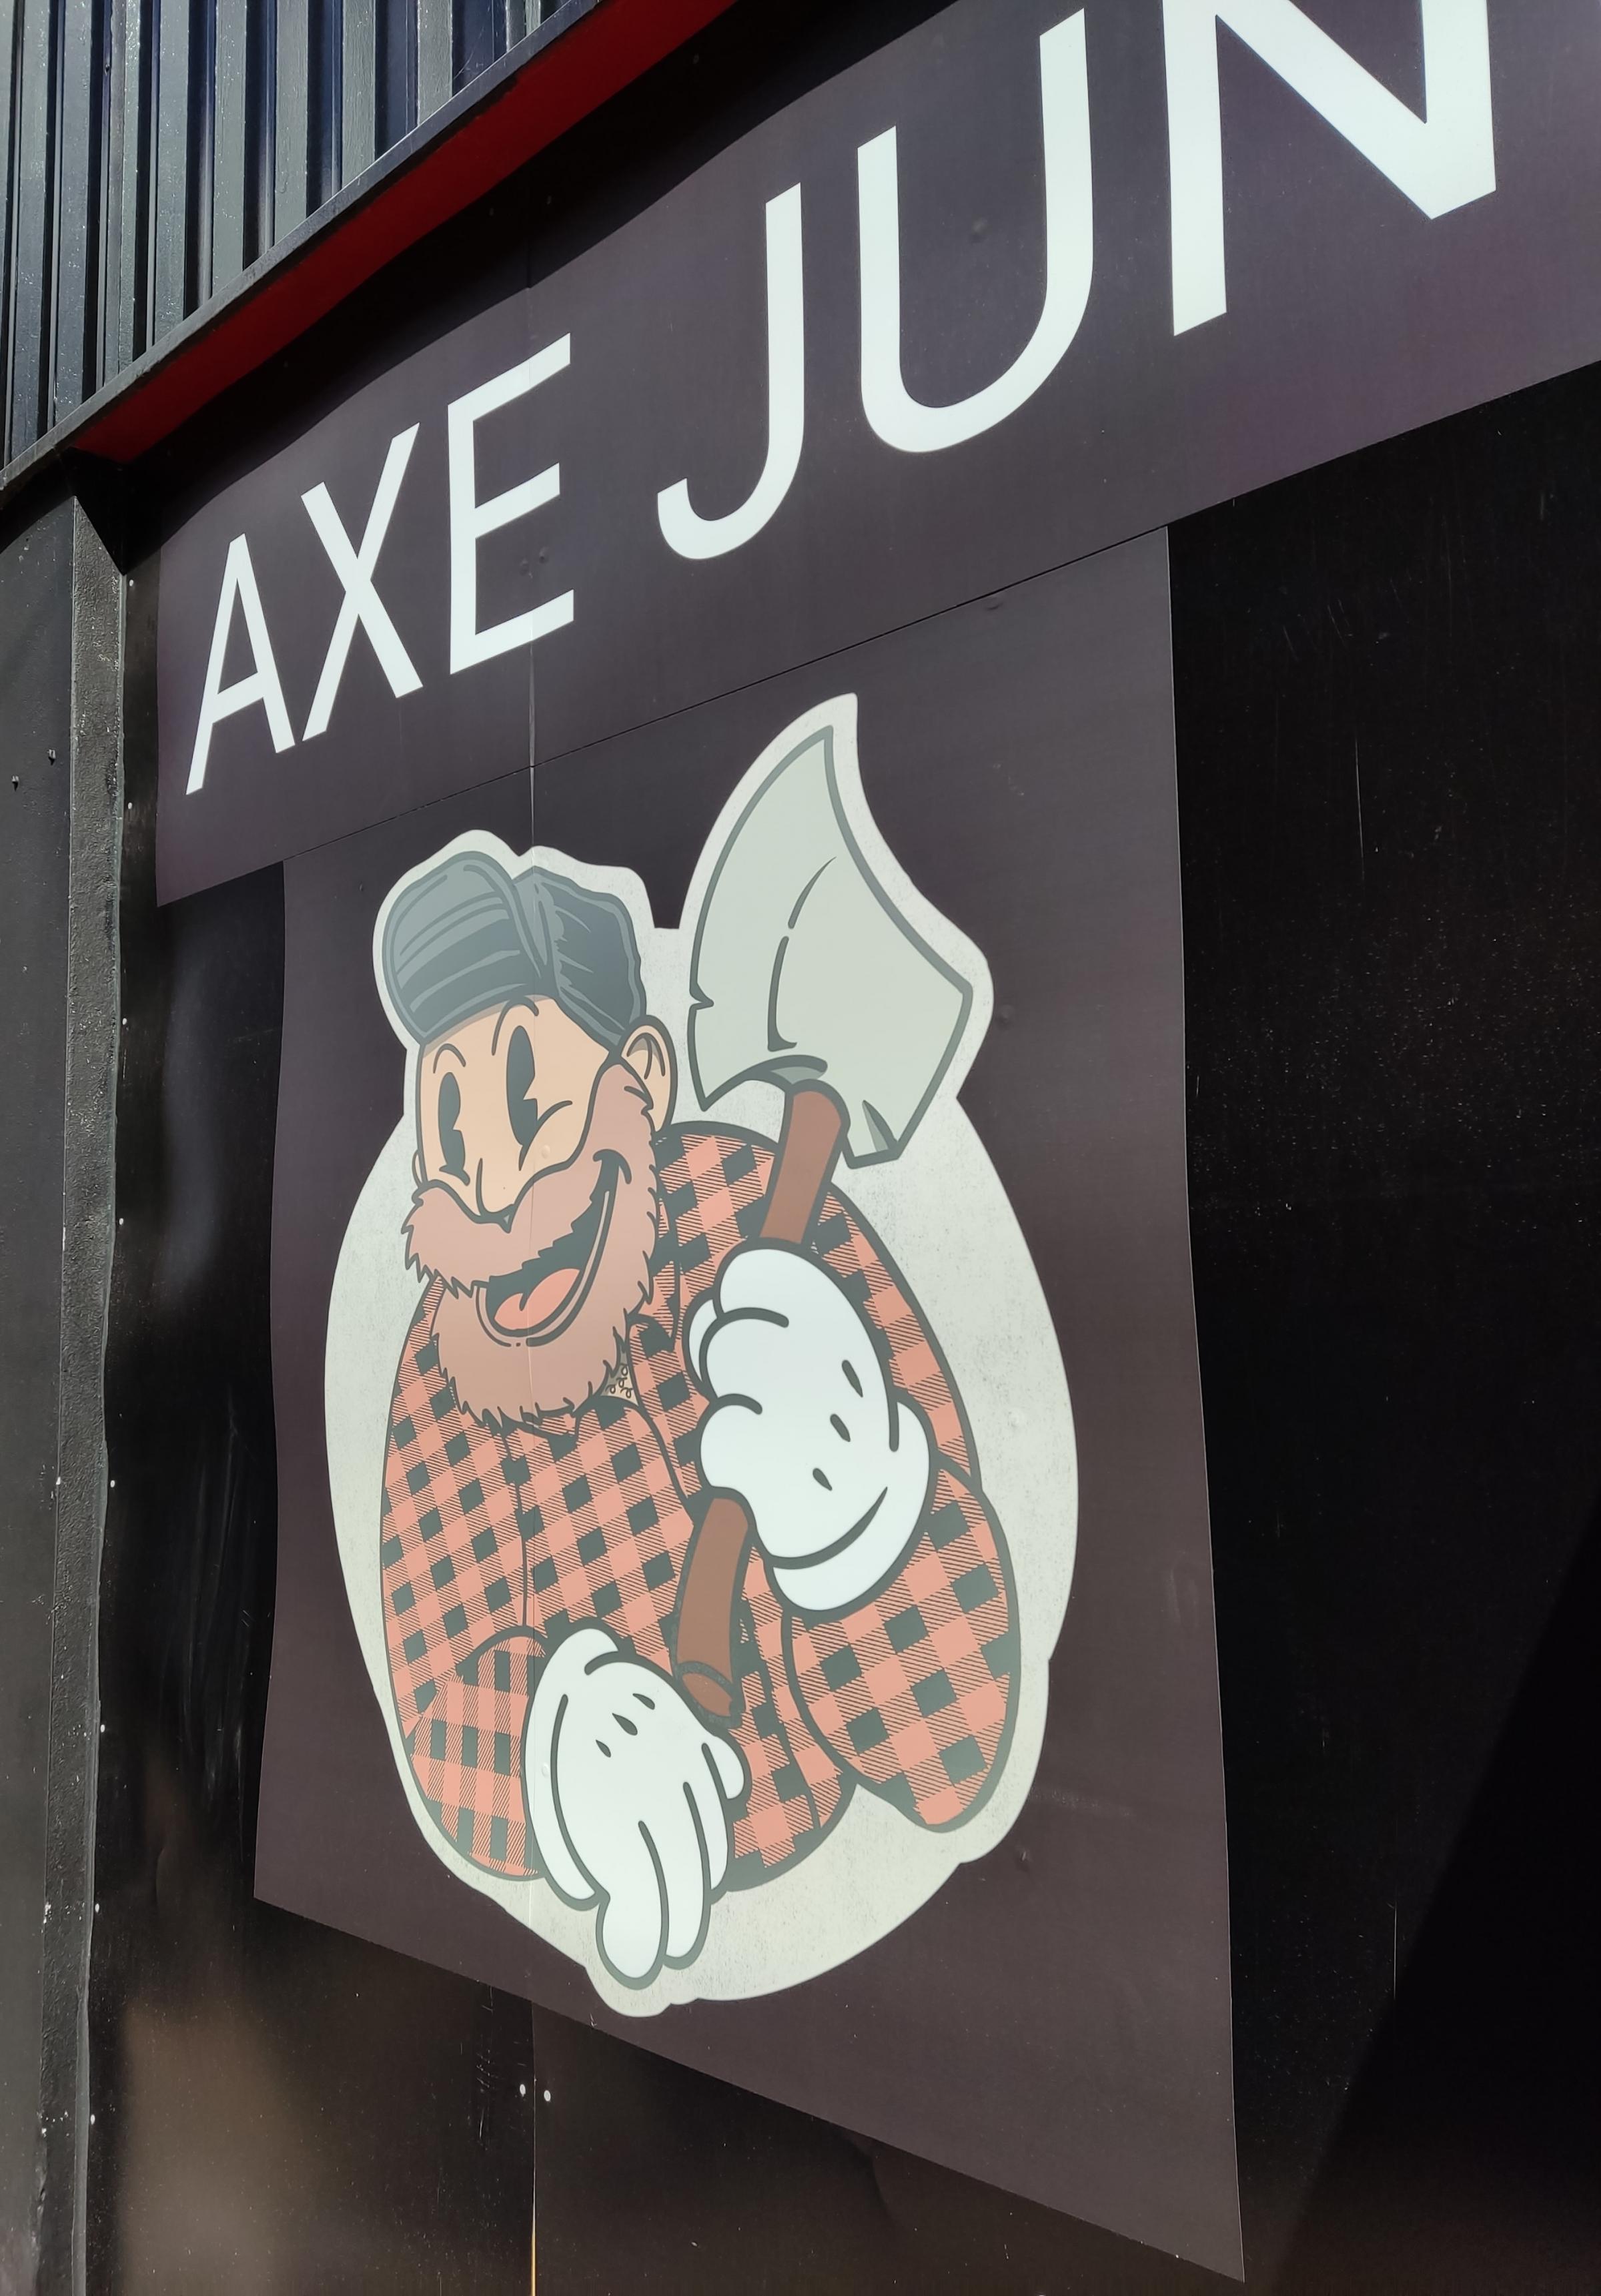 Axe Junkies is just one of the businesses to open underneath the Arches